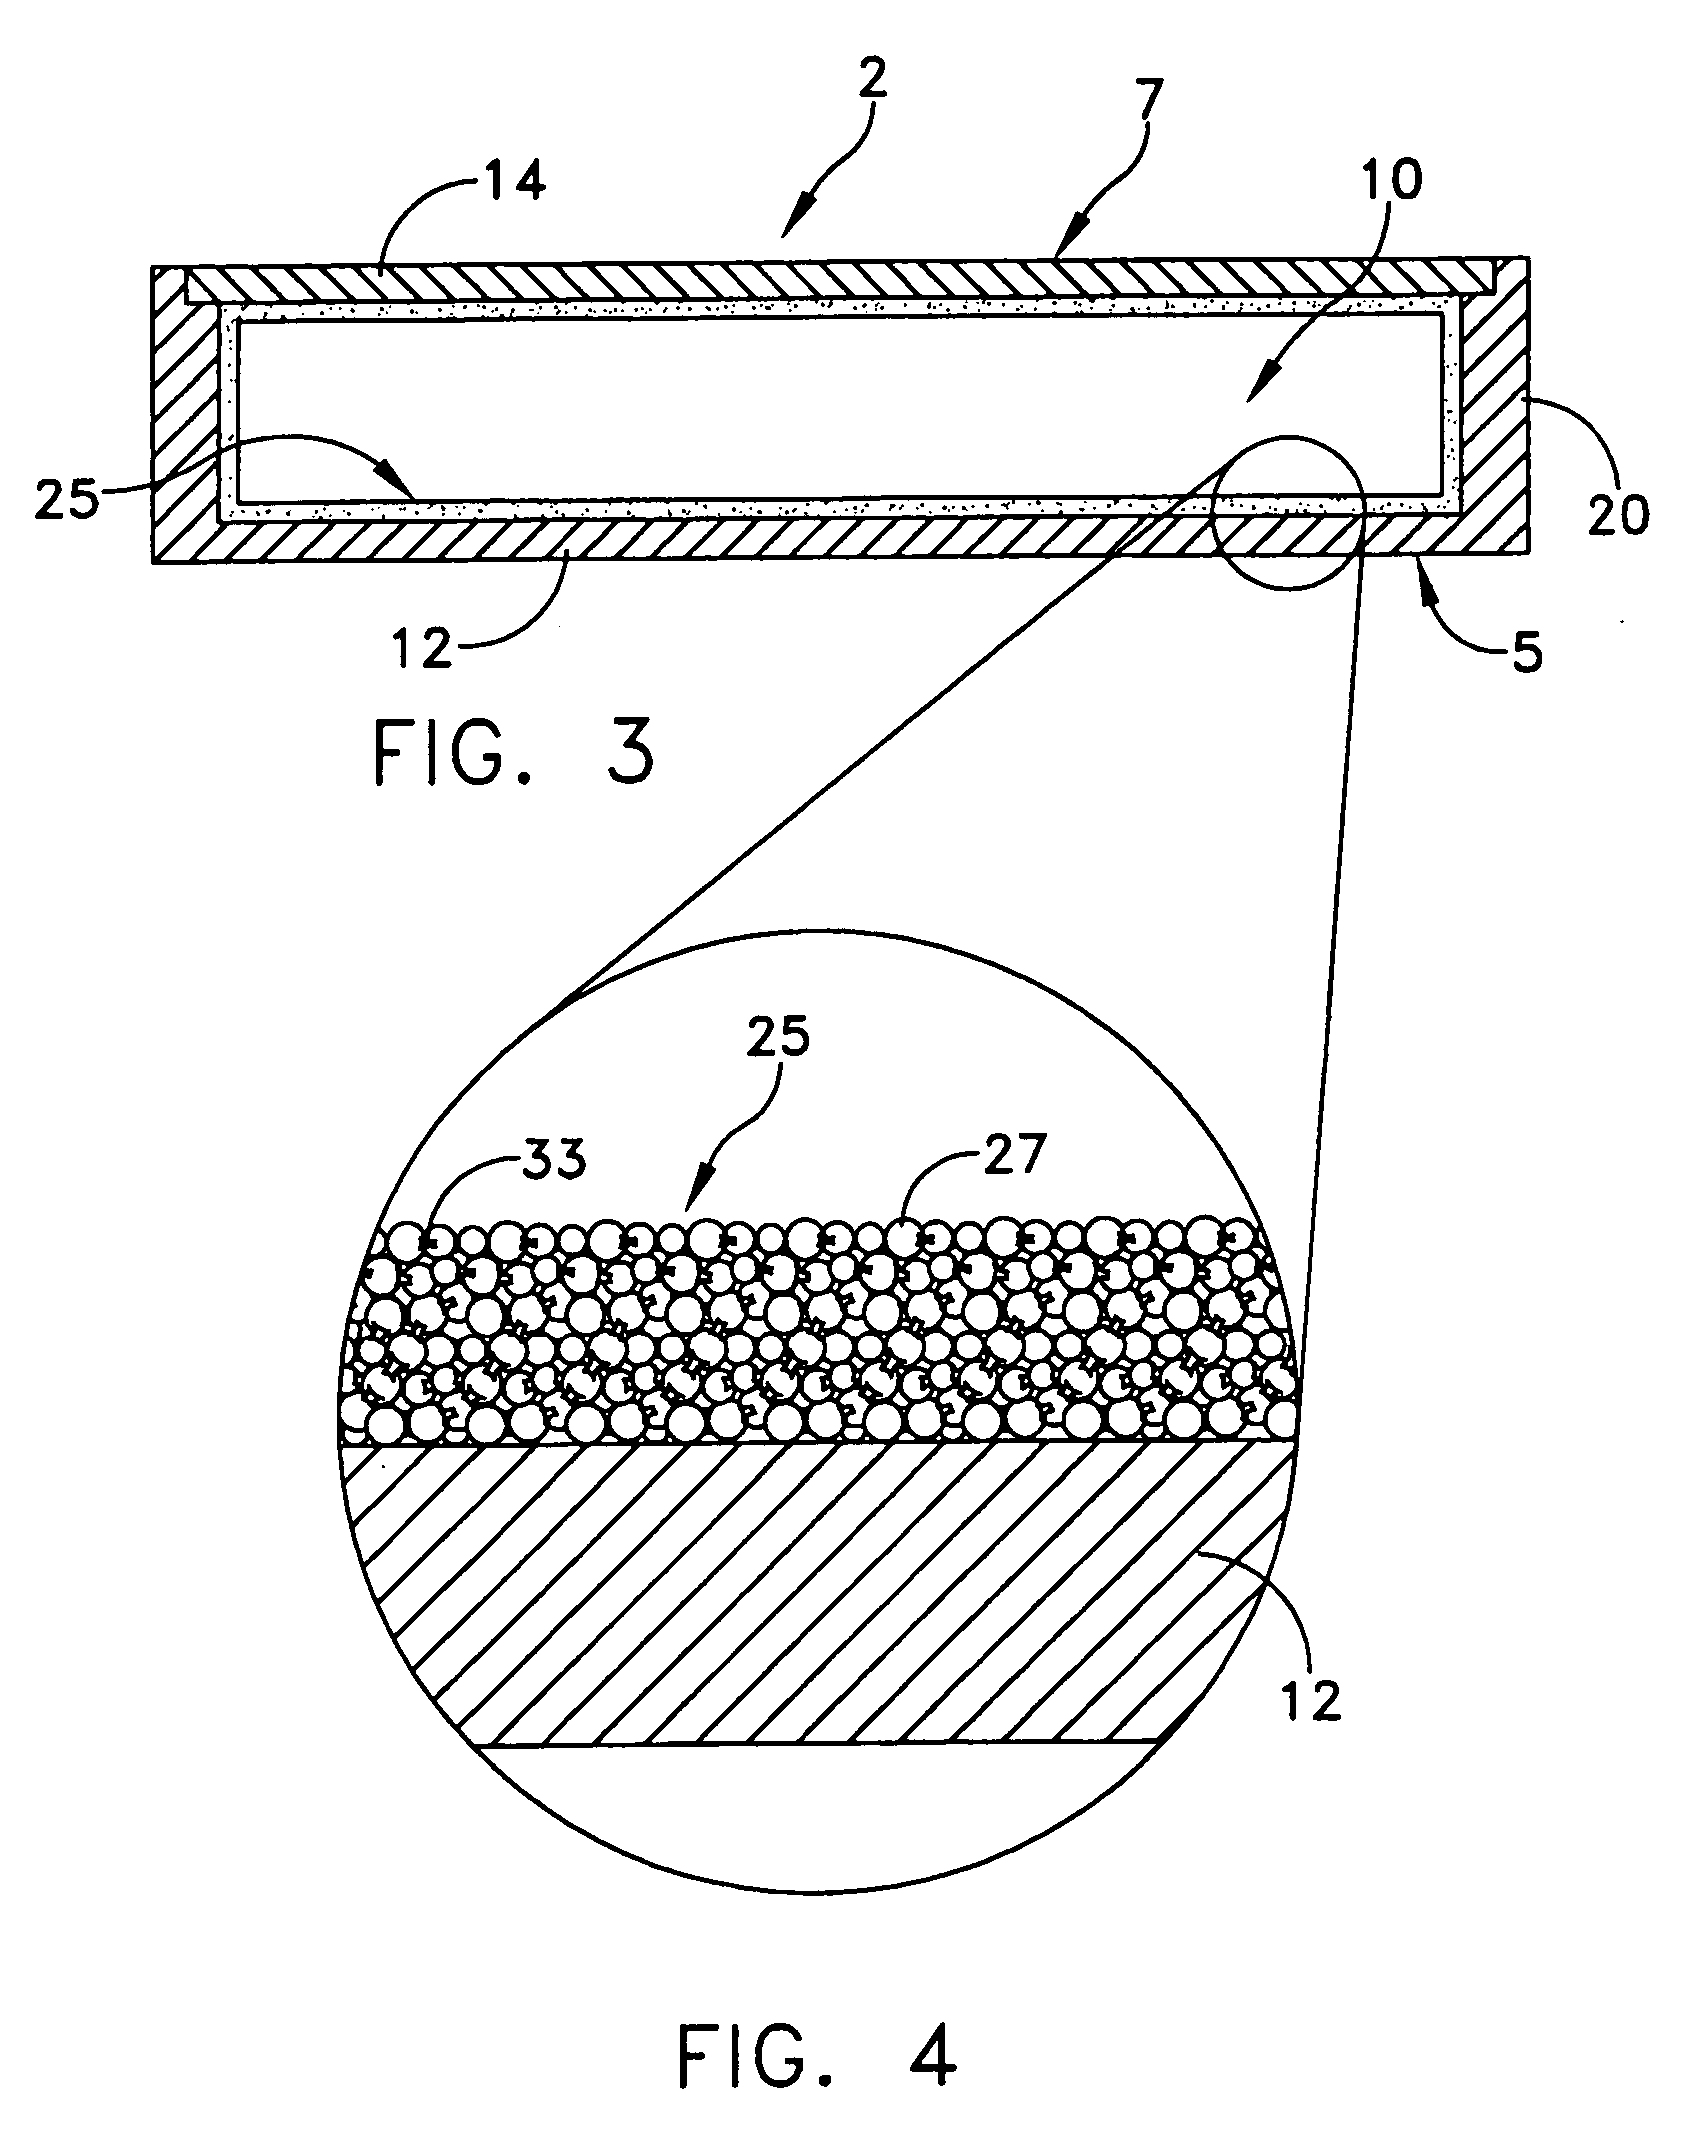 Heat transfer device and method of making same